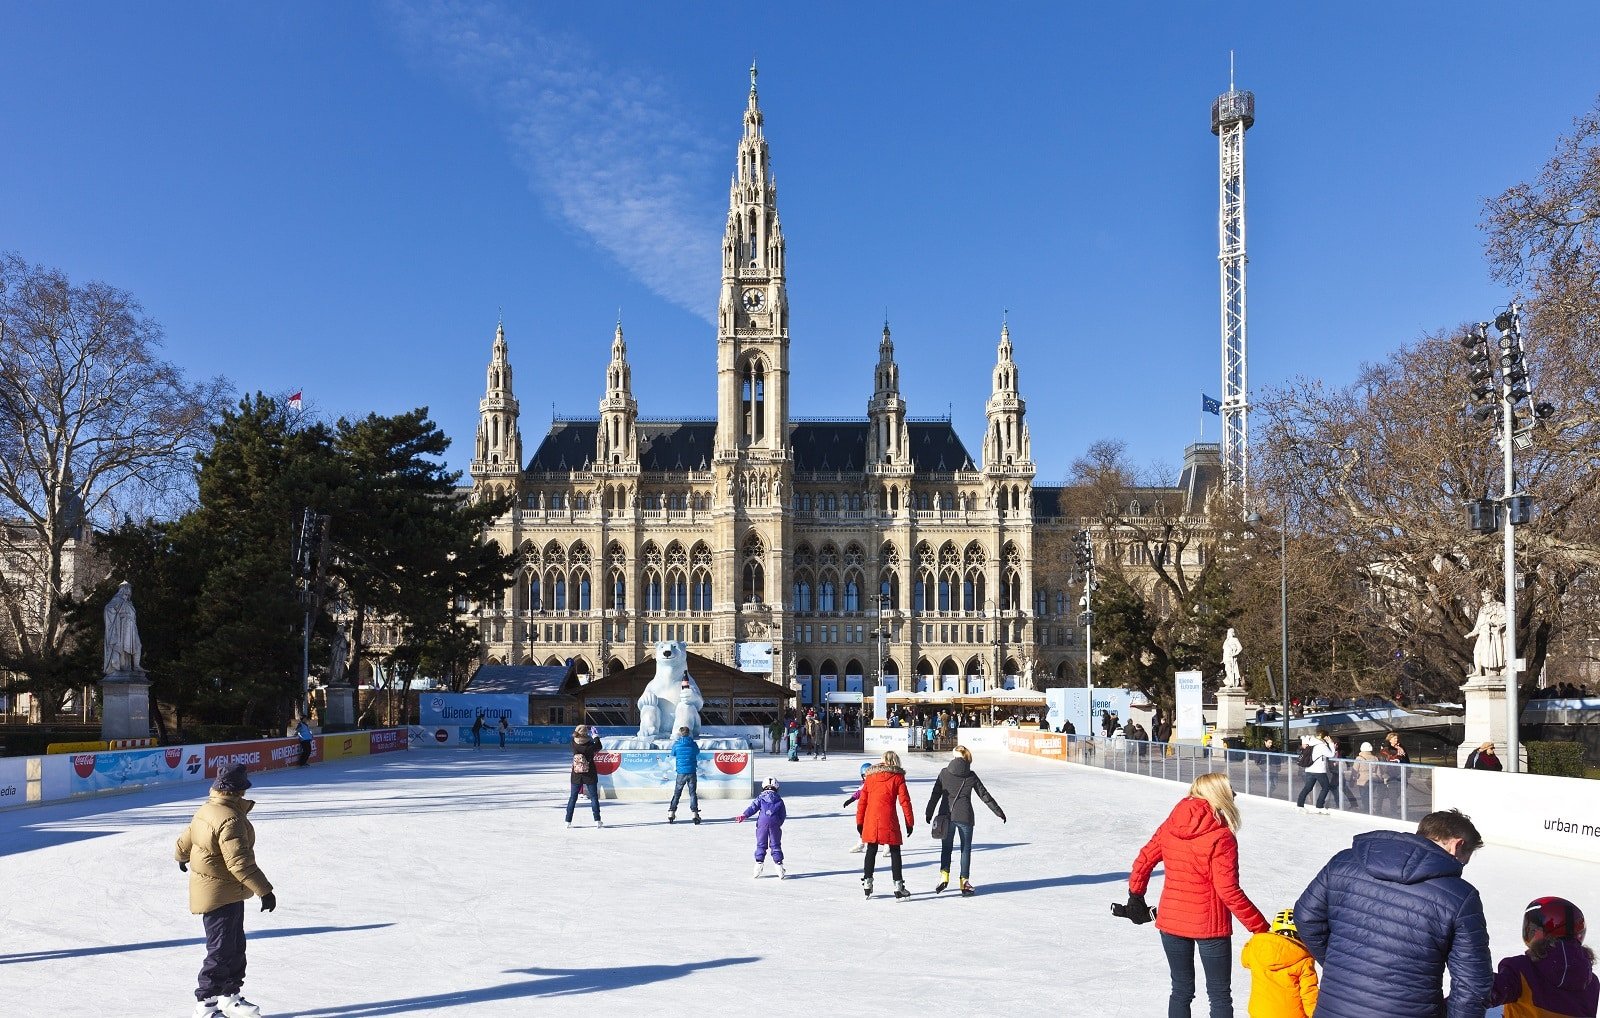 <p><span>The Wiener Eistraum (Vienna Ice Dream) transforms the area before Vienna’s City Hall into a magical ice-skating wonderland each winter. The rink, with its elaborate ice paths and majestic backdrop of the neo-Gothic Rathaus, offers a fairy-tale skating experience.</span></p> <p><span>The venue also features cozy stalls serving traditional Austrian winter treats, adding to the festive atmosphere. Skating at the Wiener Eistraum is a chance to enjoy one of Vienna’s most beloved winter traditions in a historic and picturesque setting. </span></p> <p><b>Insider’s Tip: </b><span>Visit after dark when the City Hall and rink are beautifully illuminated. </span></p> <p><b>When to Travel: </b><span>January to March for the Wiener Eistraum event. </span></p> <p><b>How to Get There: </b><span>Fly to Vienna International Airport and travel to the city center.</span></p>